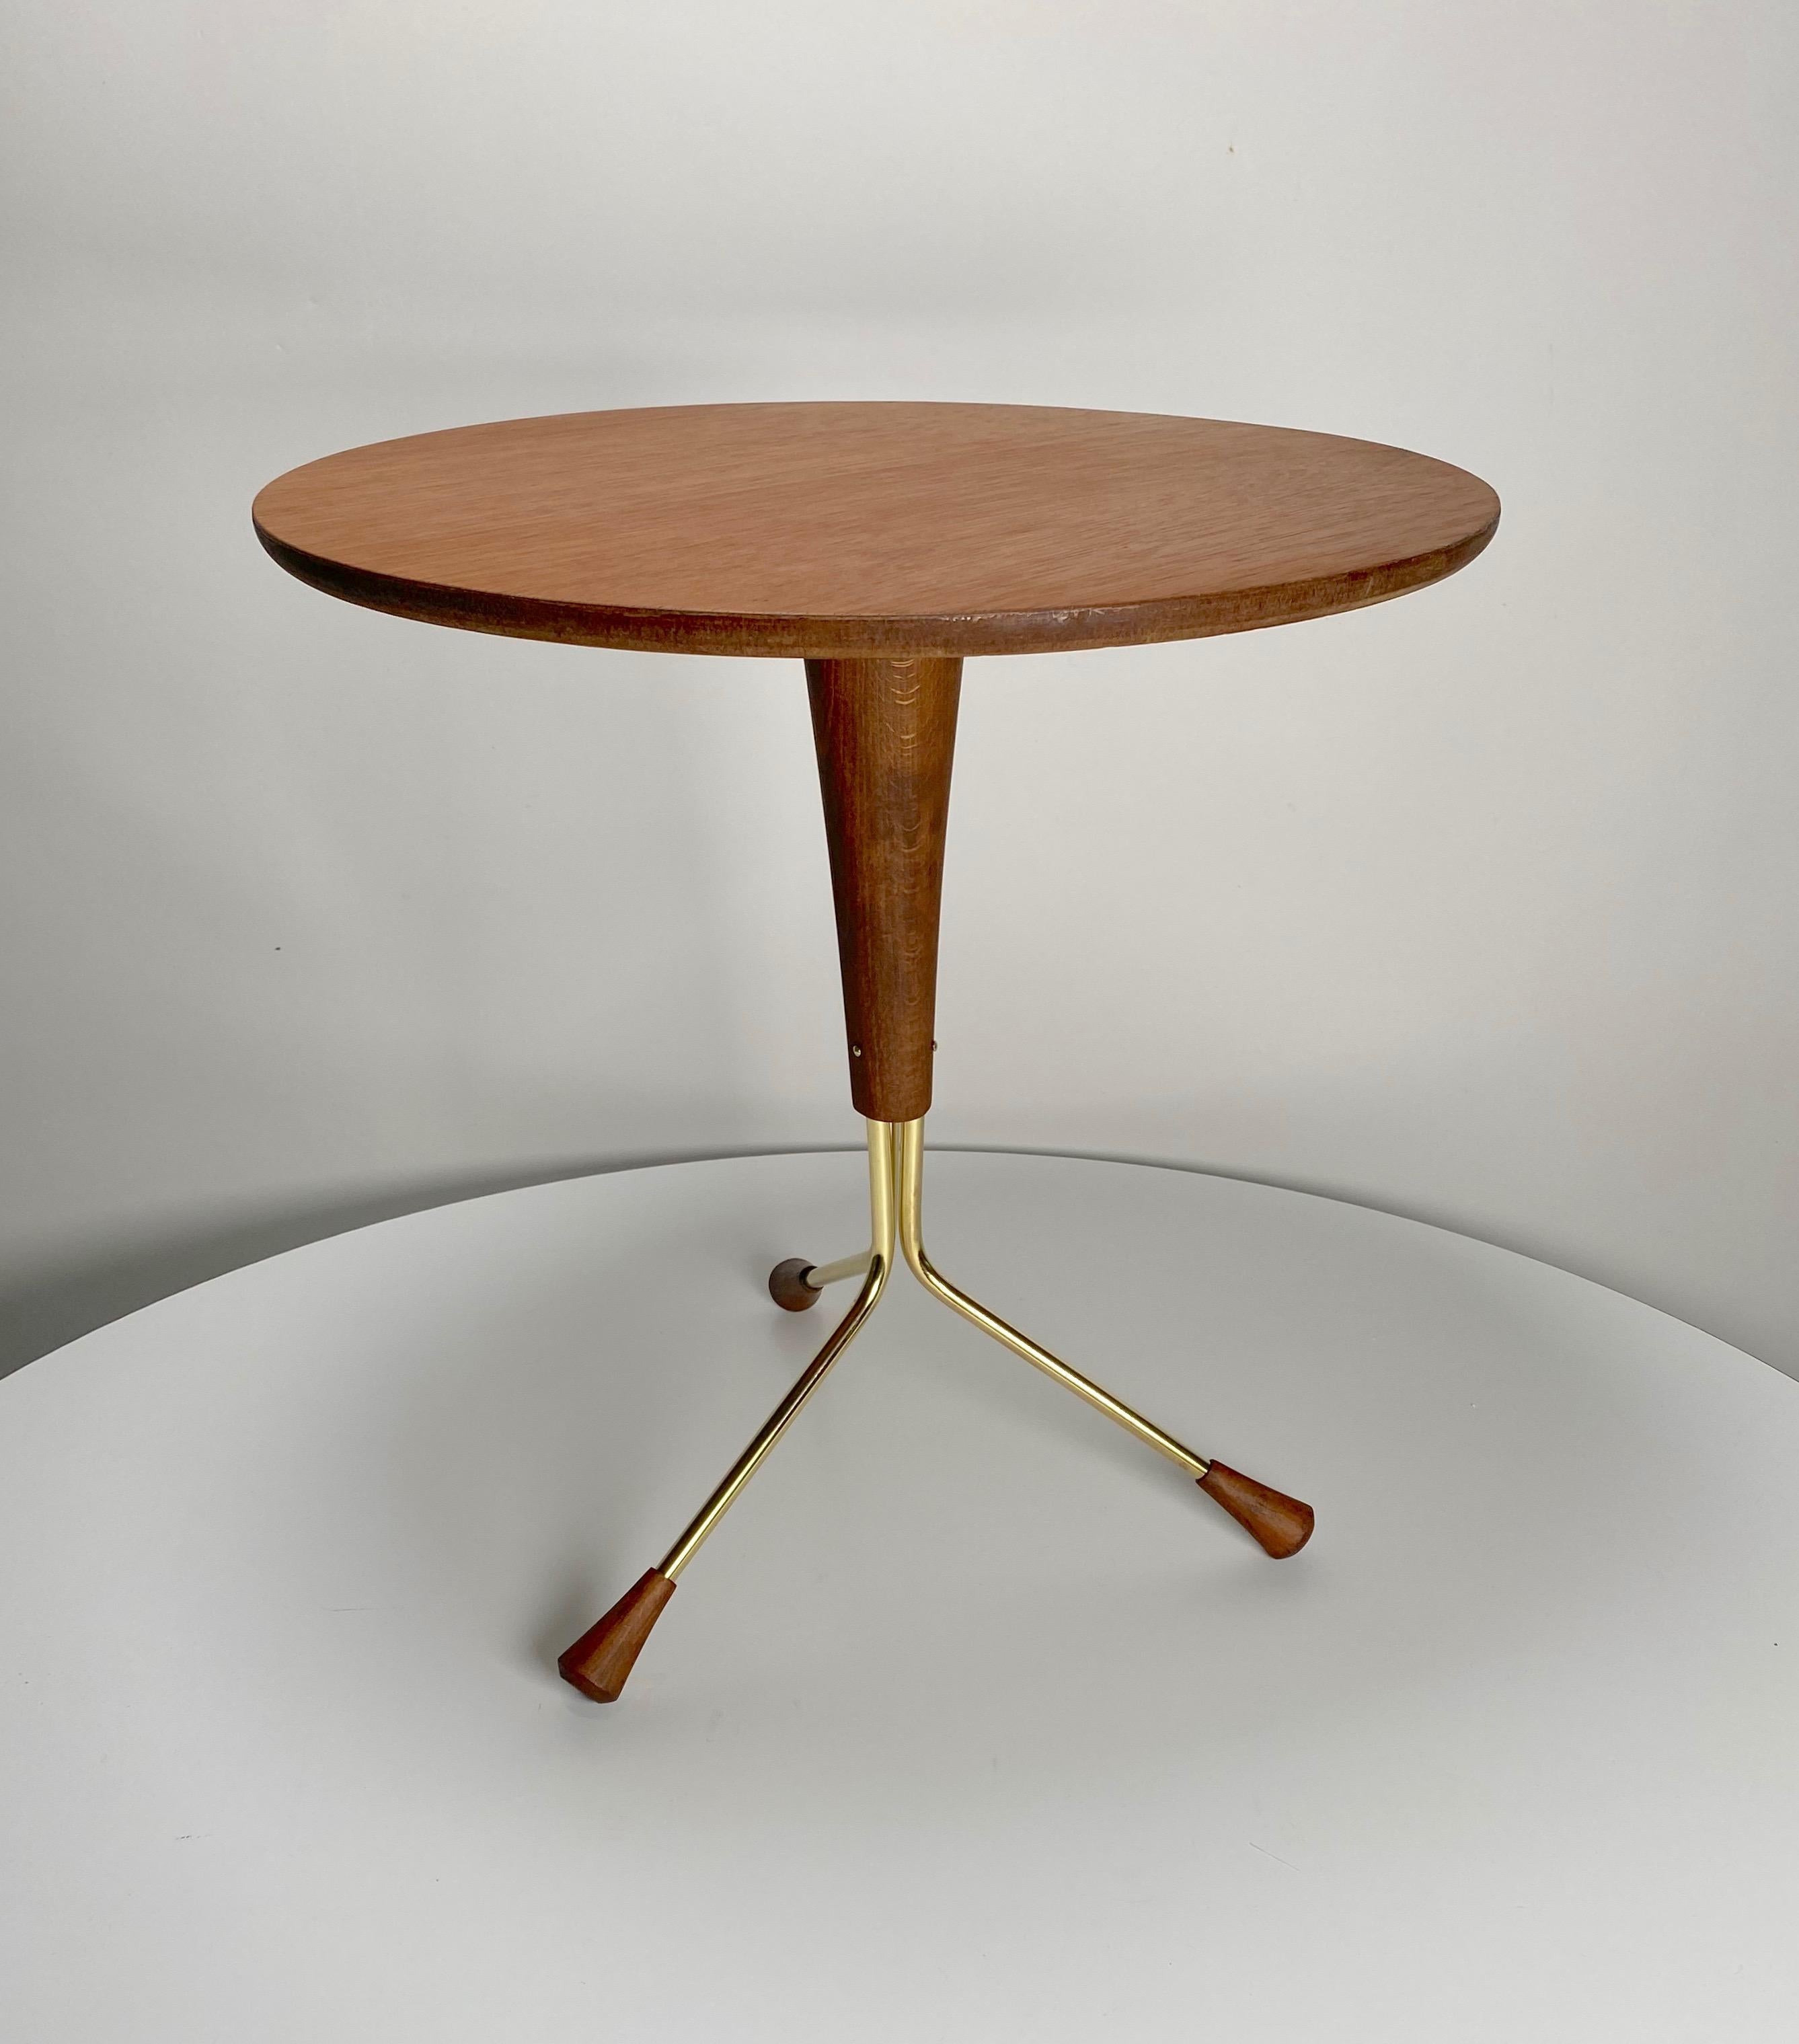 Small tripod base side table in mahogany and brass in the Scandinavian Modern aesthetic by Alberts Larsson for his company Alberts Tibro. Three curved brass legs with turned wooden feet contacted to a tapered wooden base and a round mahogany top.